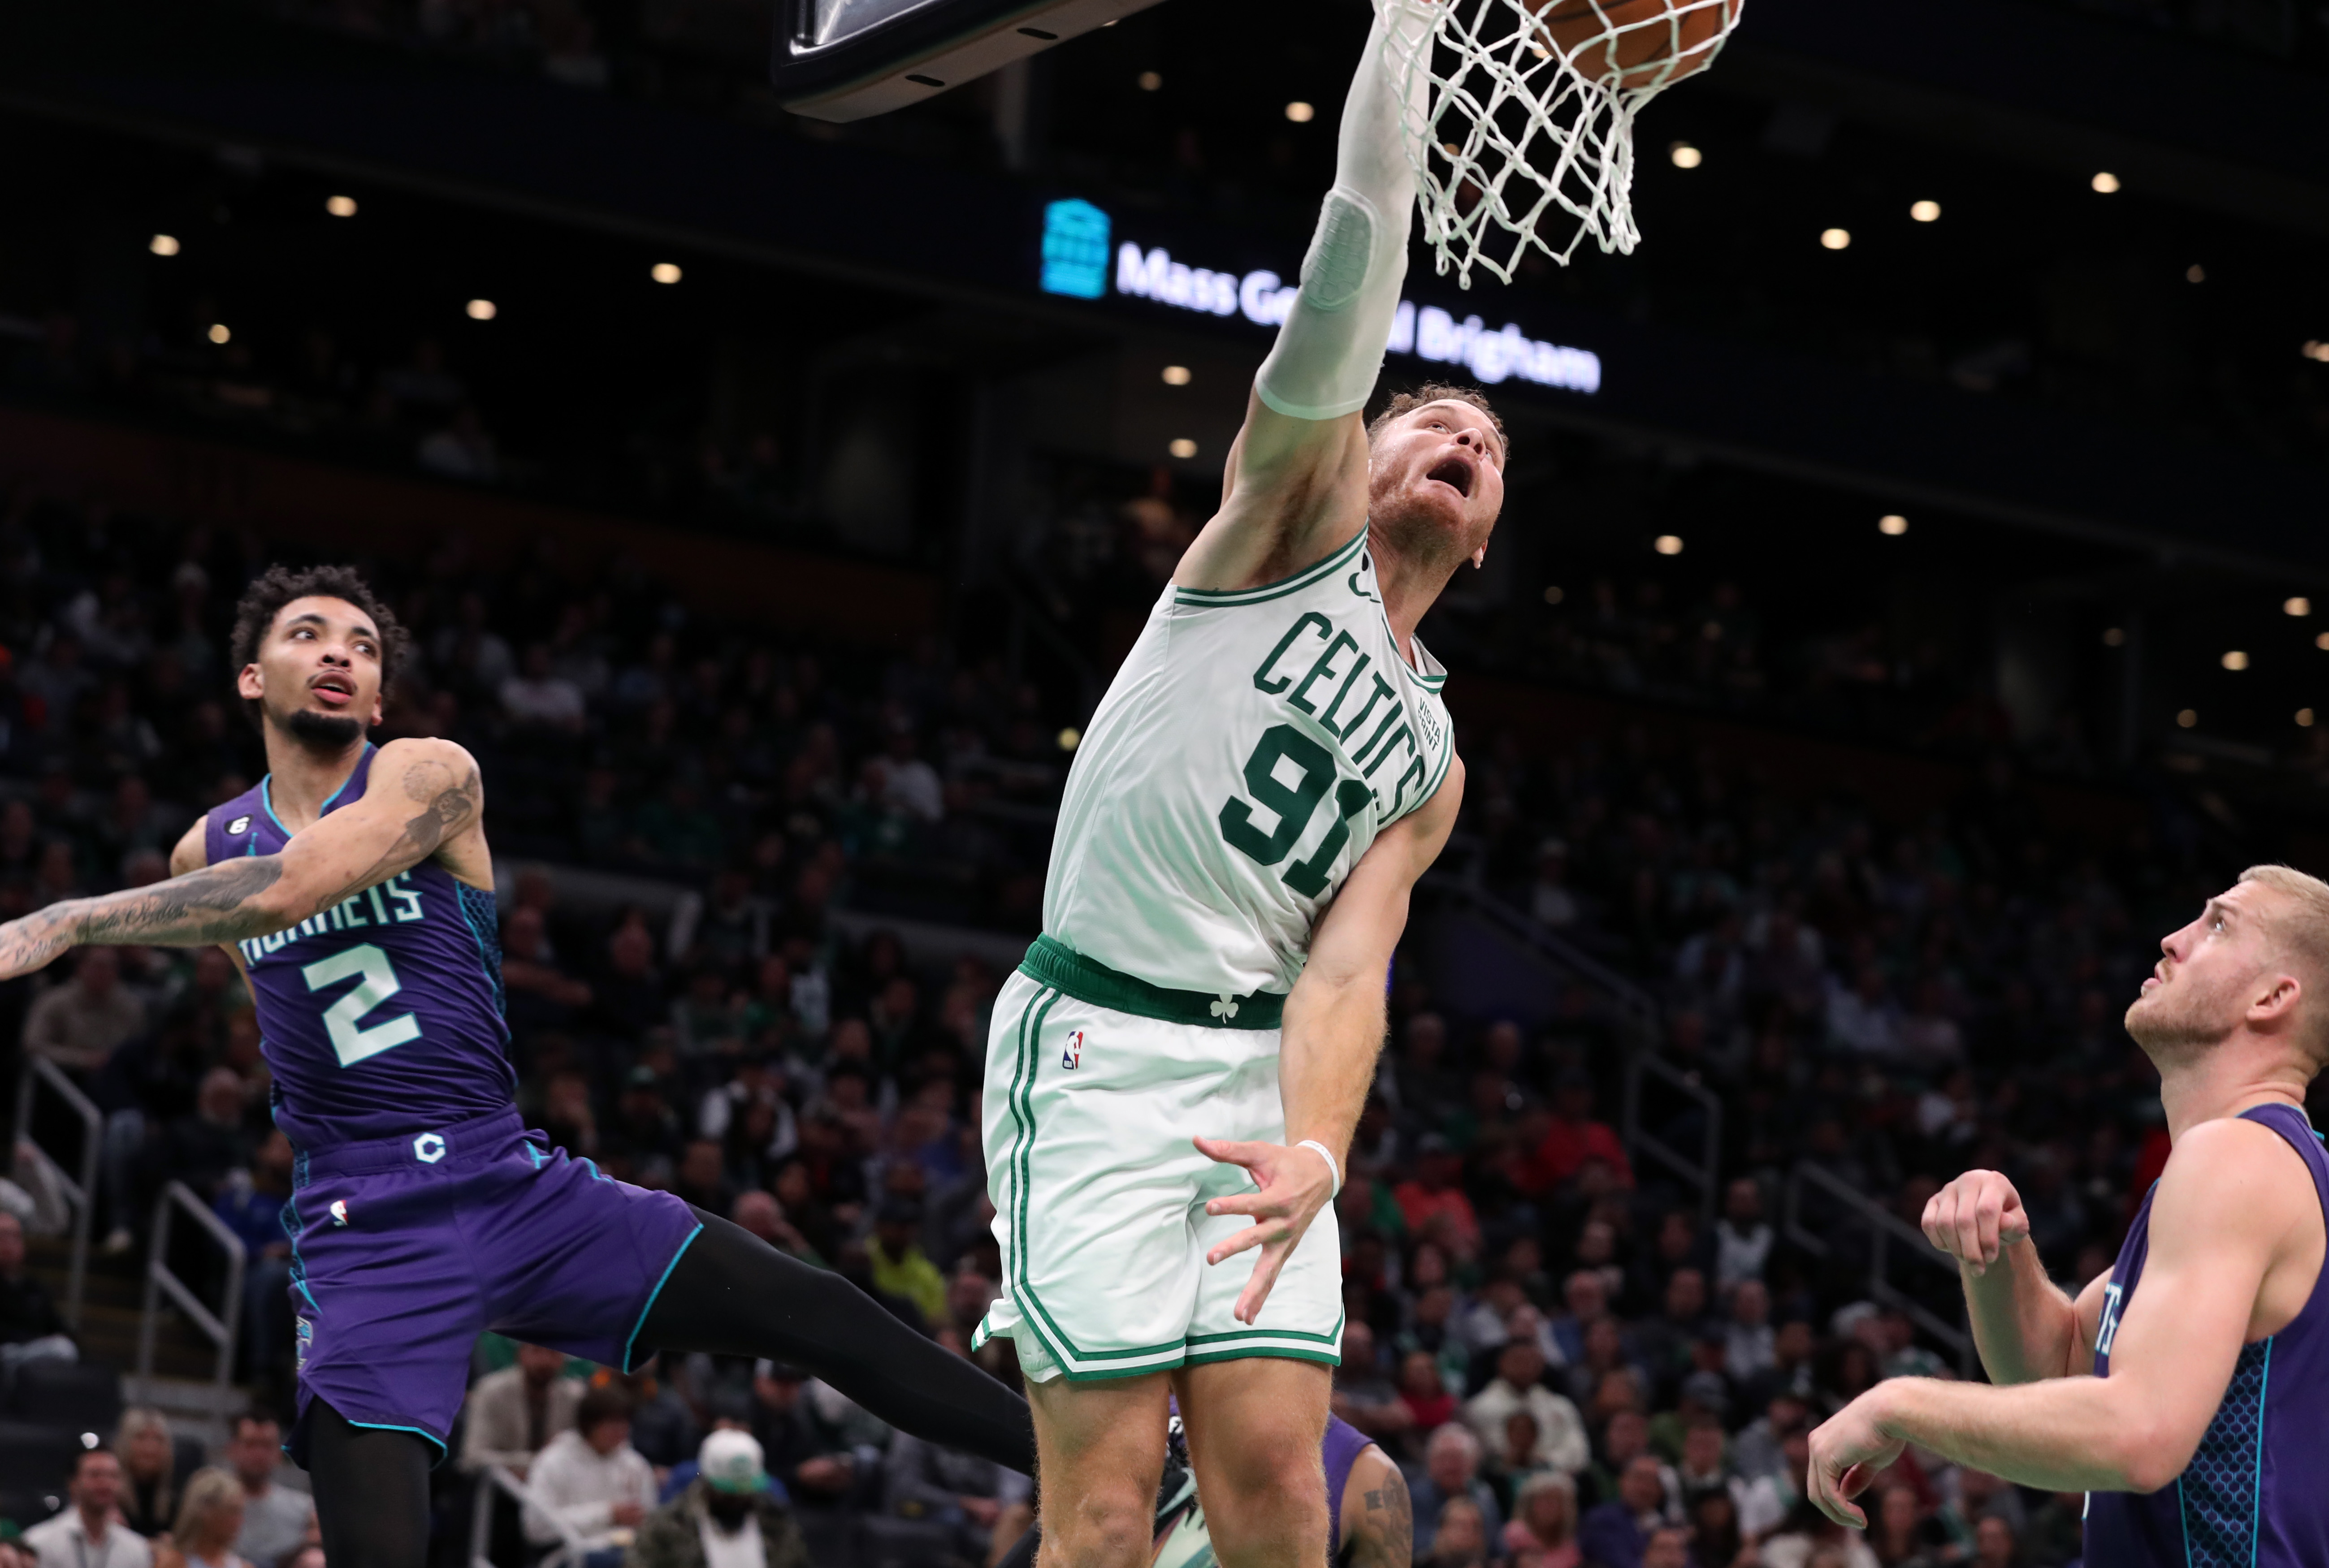 Blake Griffin stays ready and dunks twice in spot Celtics start